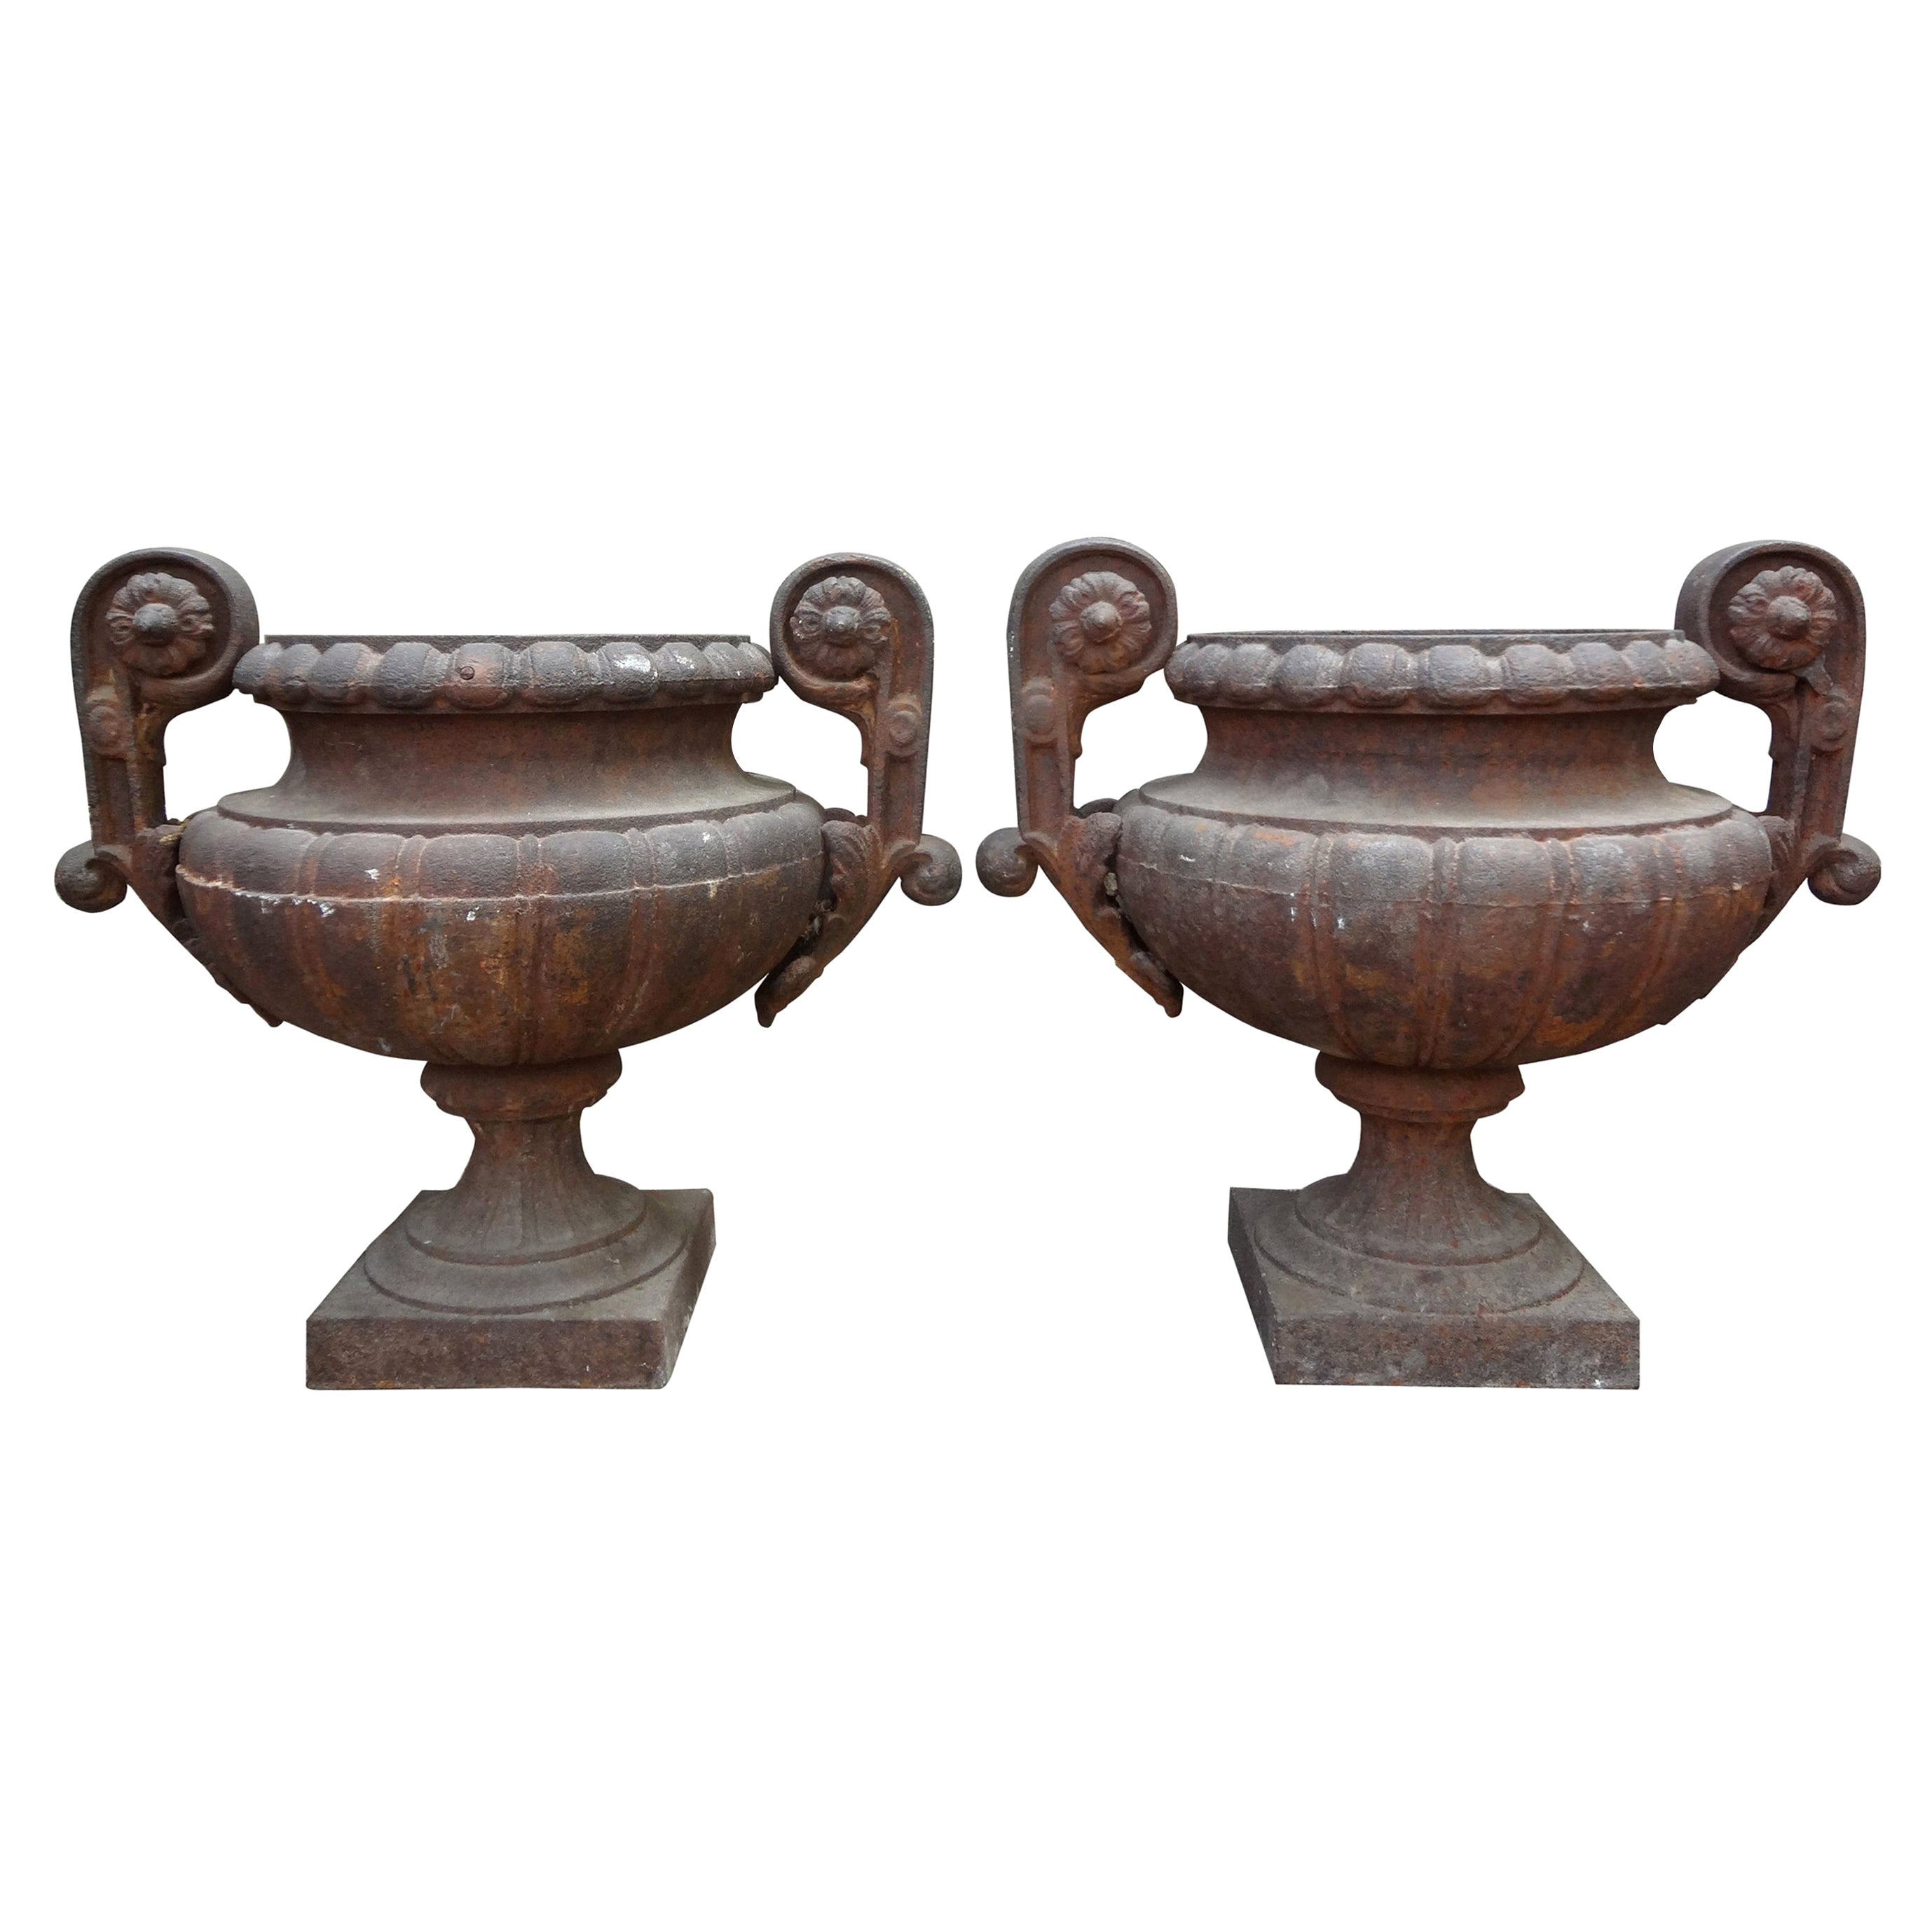 Pair of 19th Century French Cast Iron Garden Urns with Handles